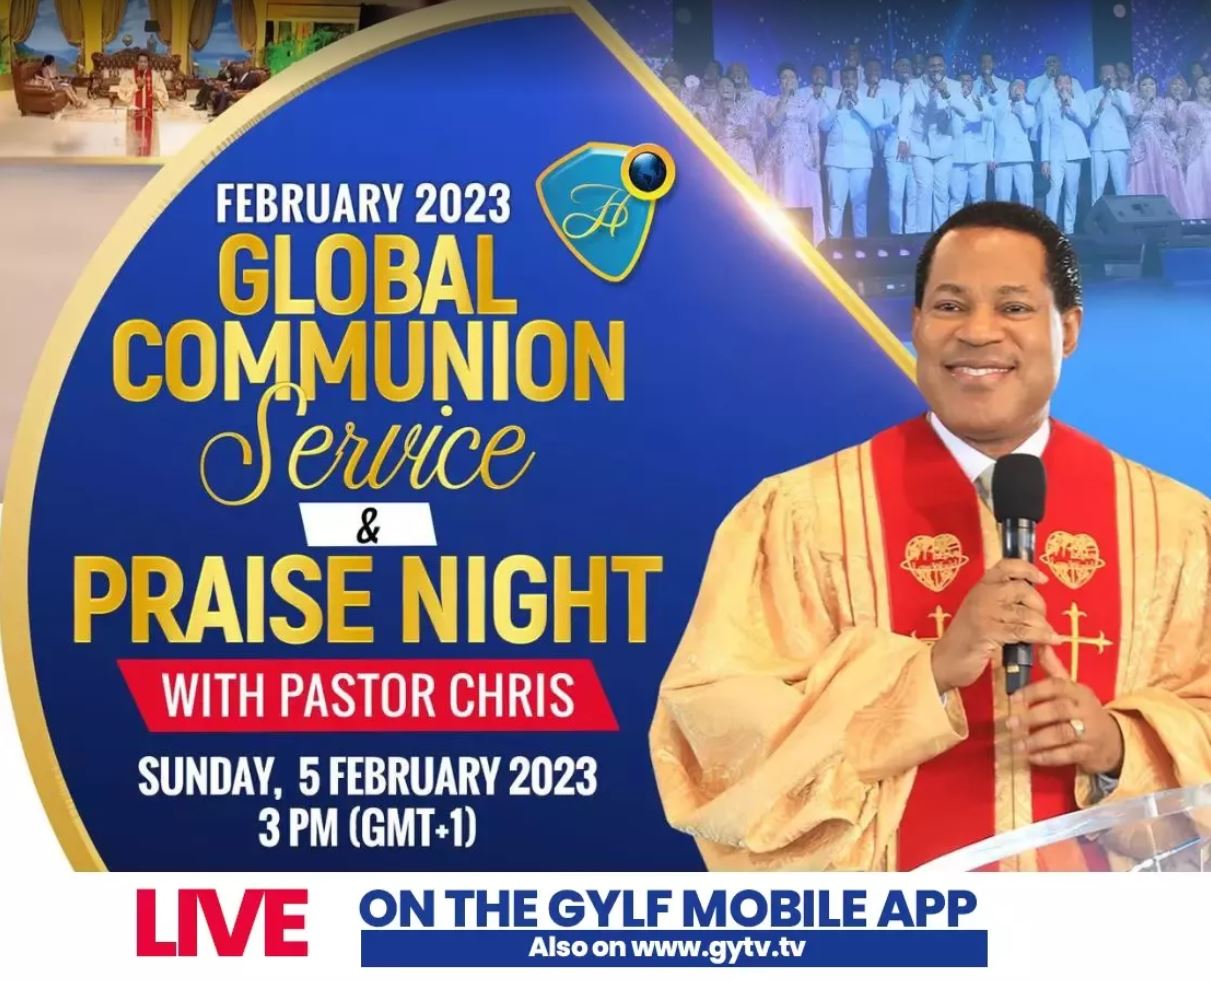 2 DAYS TO PREPARE: GLOBAL COMMUNION SERVICE AND PRAISE NIGHT WITH PASTOR CHRIS